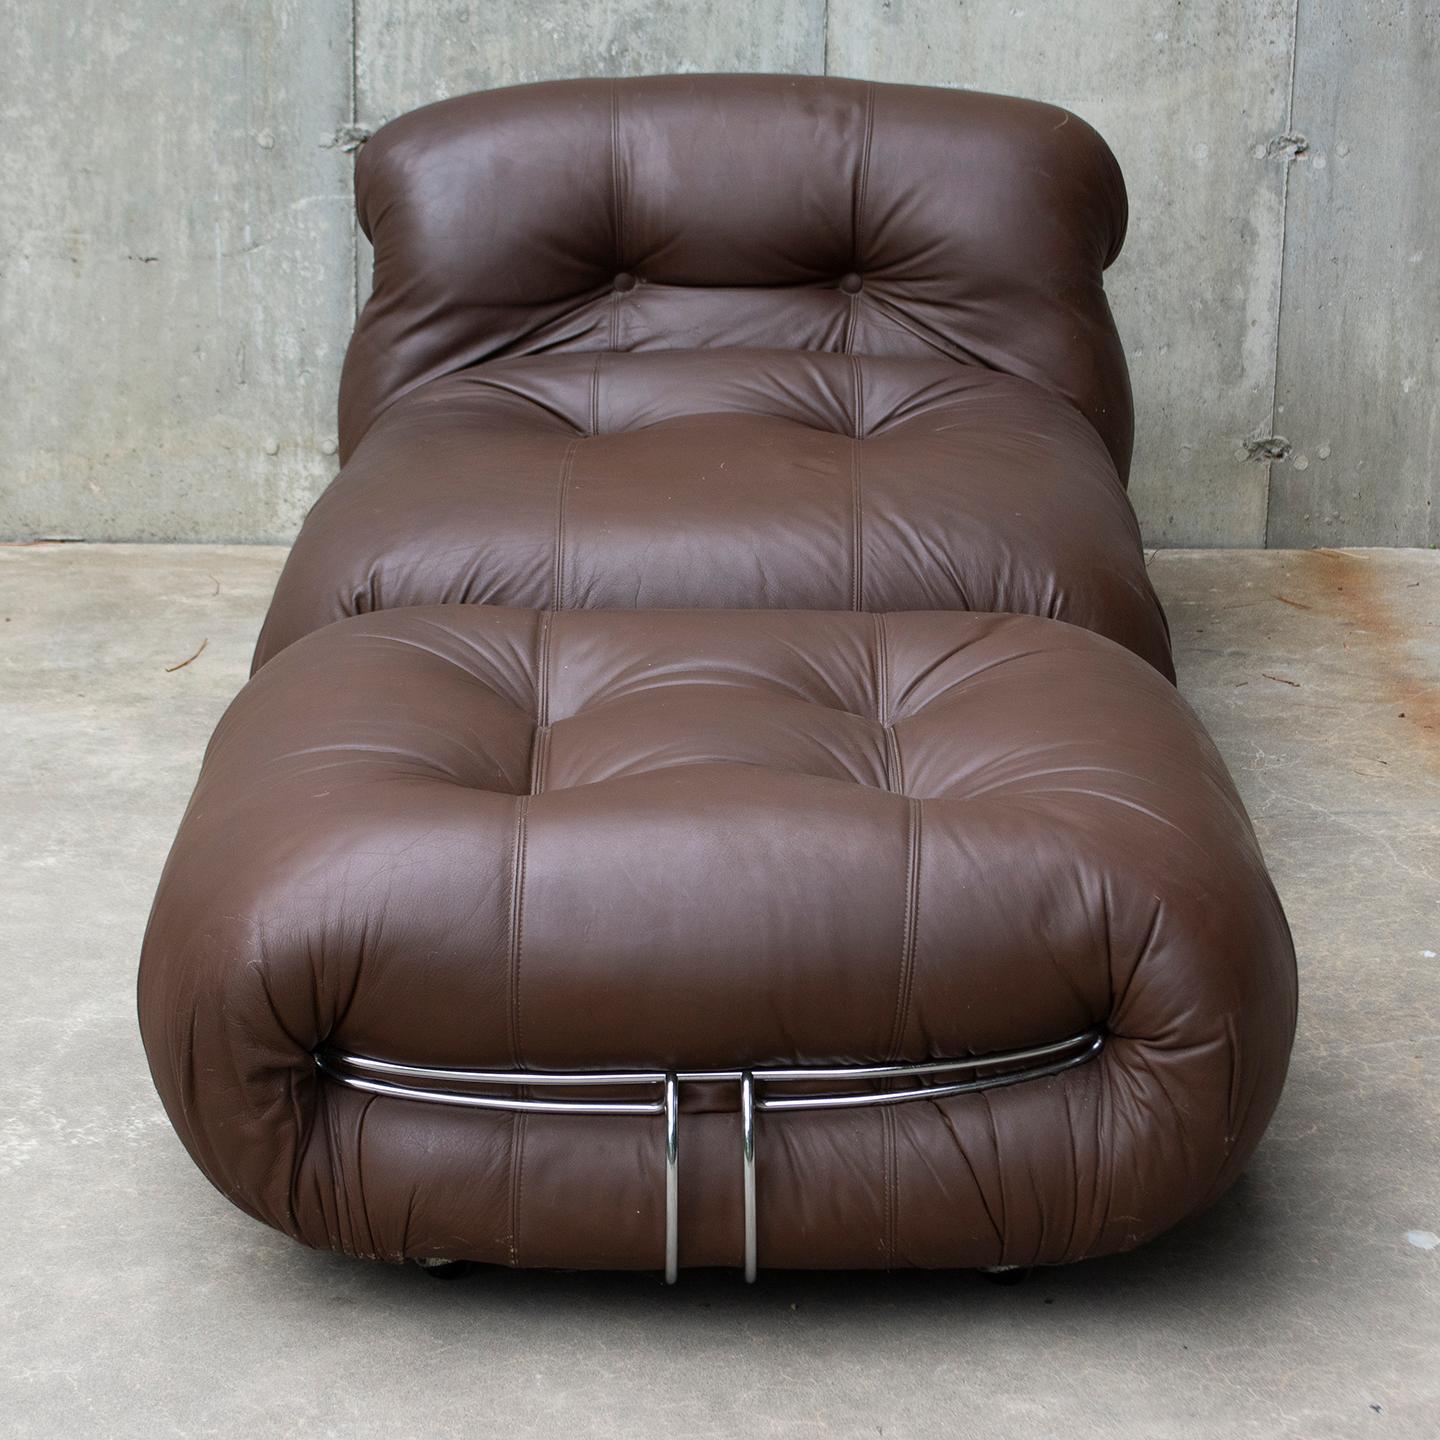 Soriana lounge chair with ottoman by Afra & Tobia Scarpa, made in Italy by Cassina, circa 1970’s. The original rich chocolate brown leather and foam are in great condition and shows its trademark round and bulky shape. The concept behind the Soriana